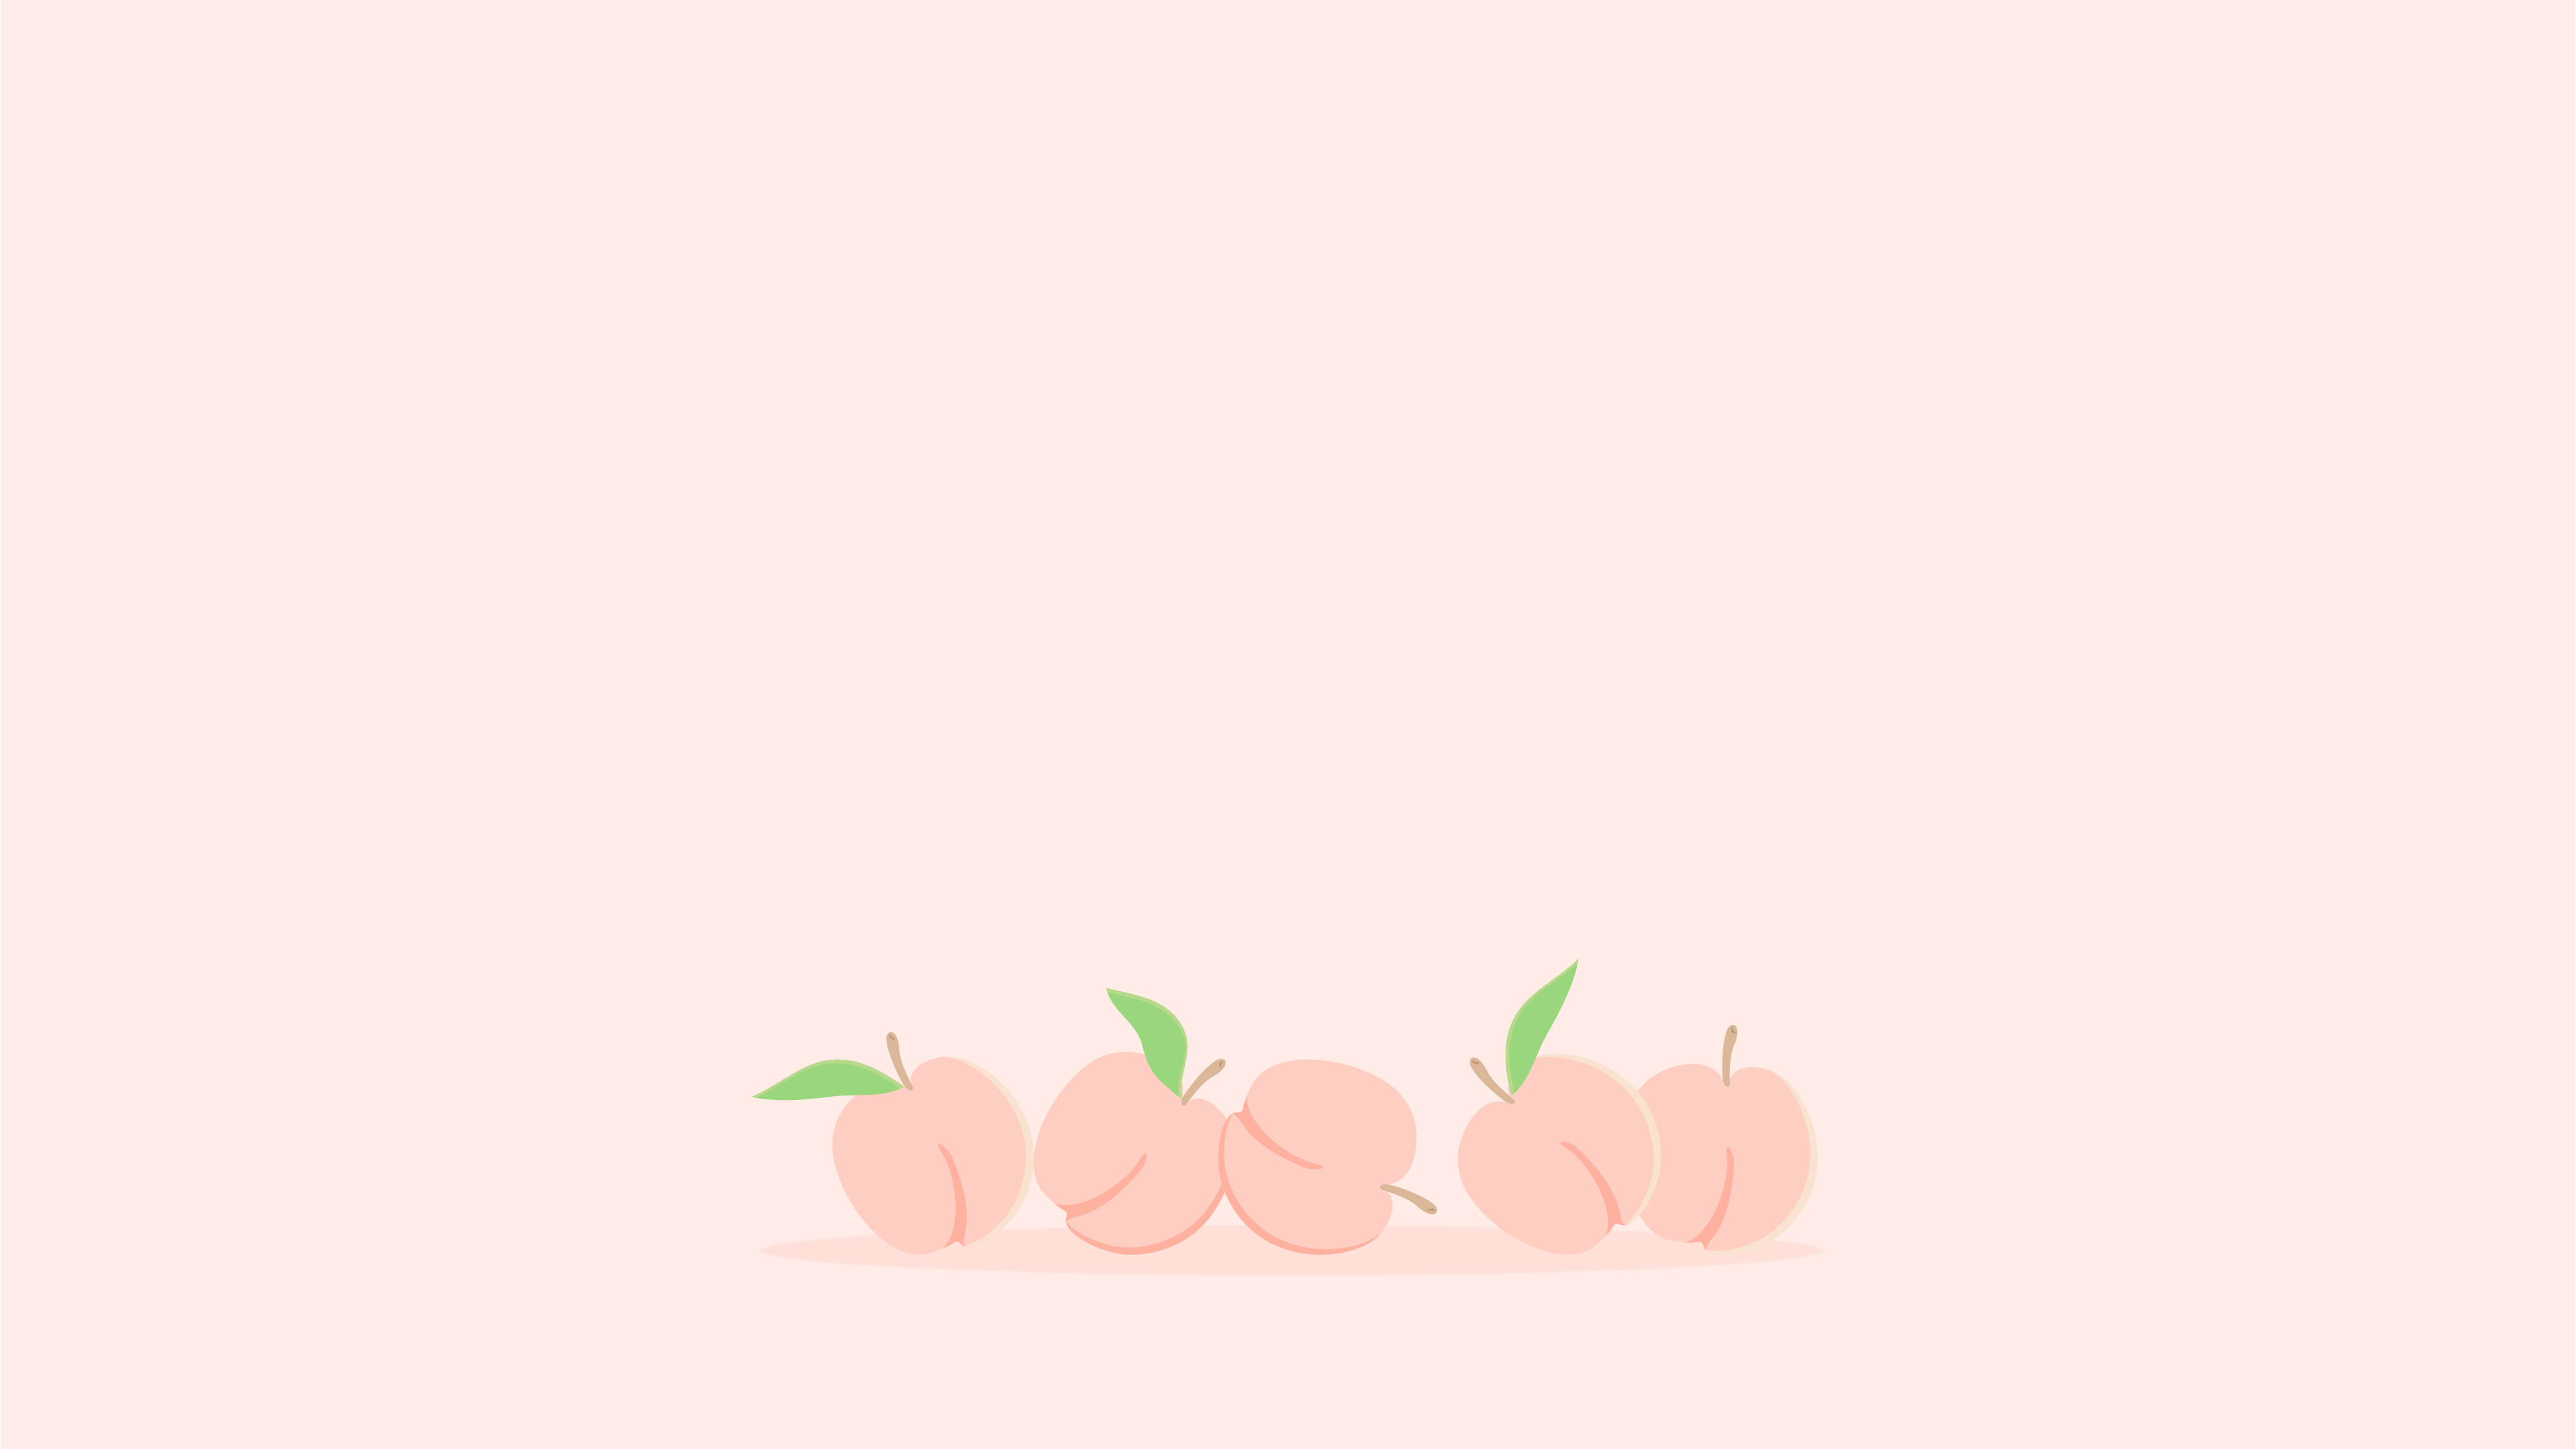 Aesthetic Peaches PC Wallpapers - Wallpaper Cave.